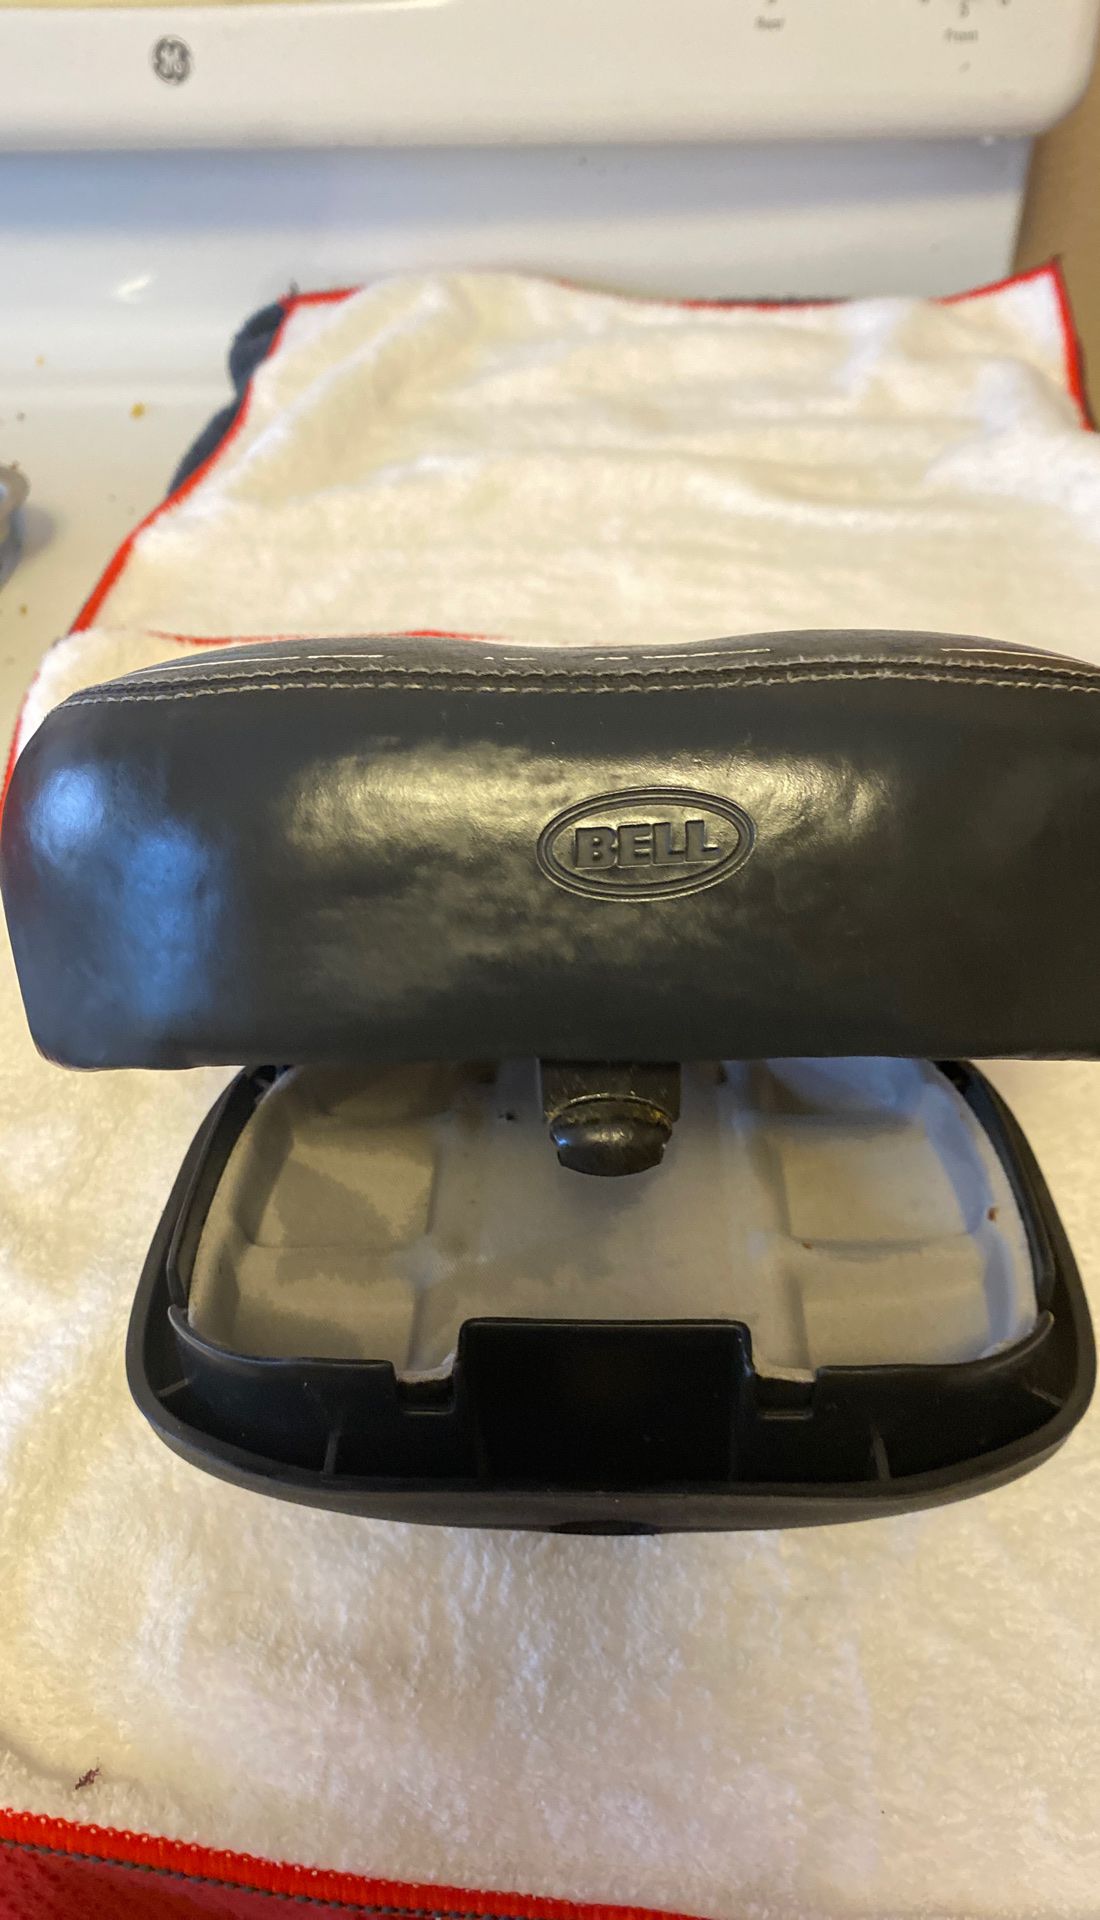 BELL COMFORT CHANNEL BIKE SEAT WITH STORAGE